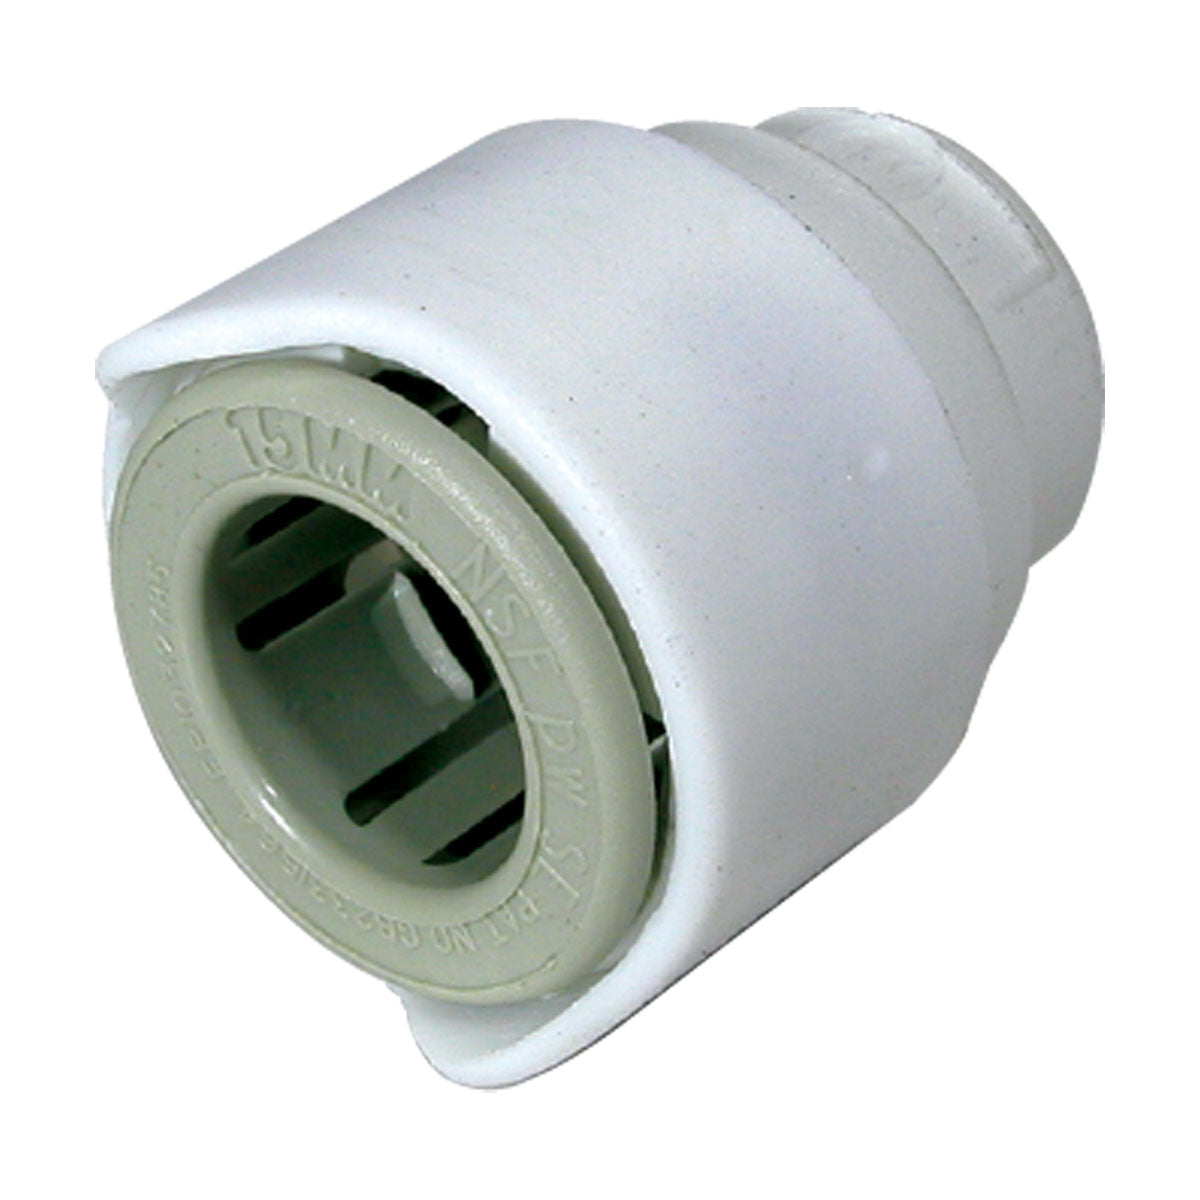 Whale® End Stop 15mm – Quick Connect 15